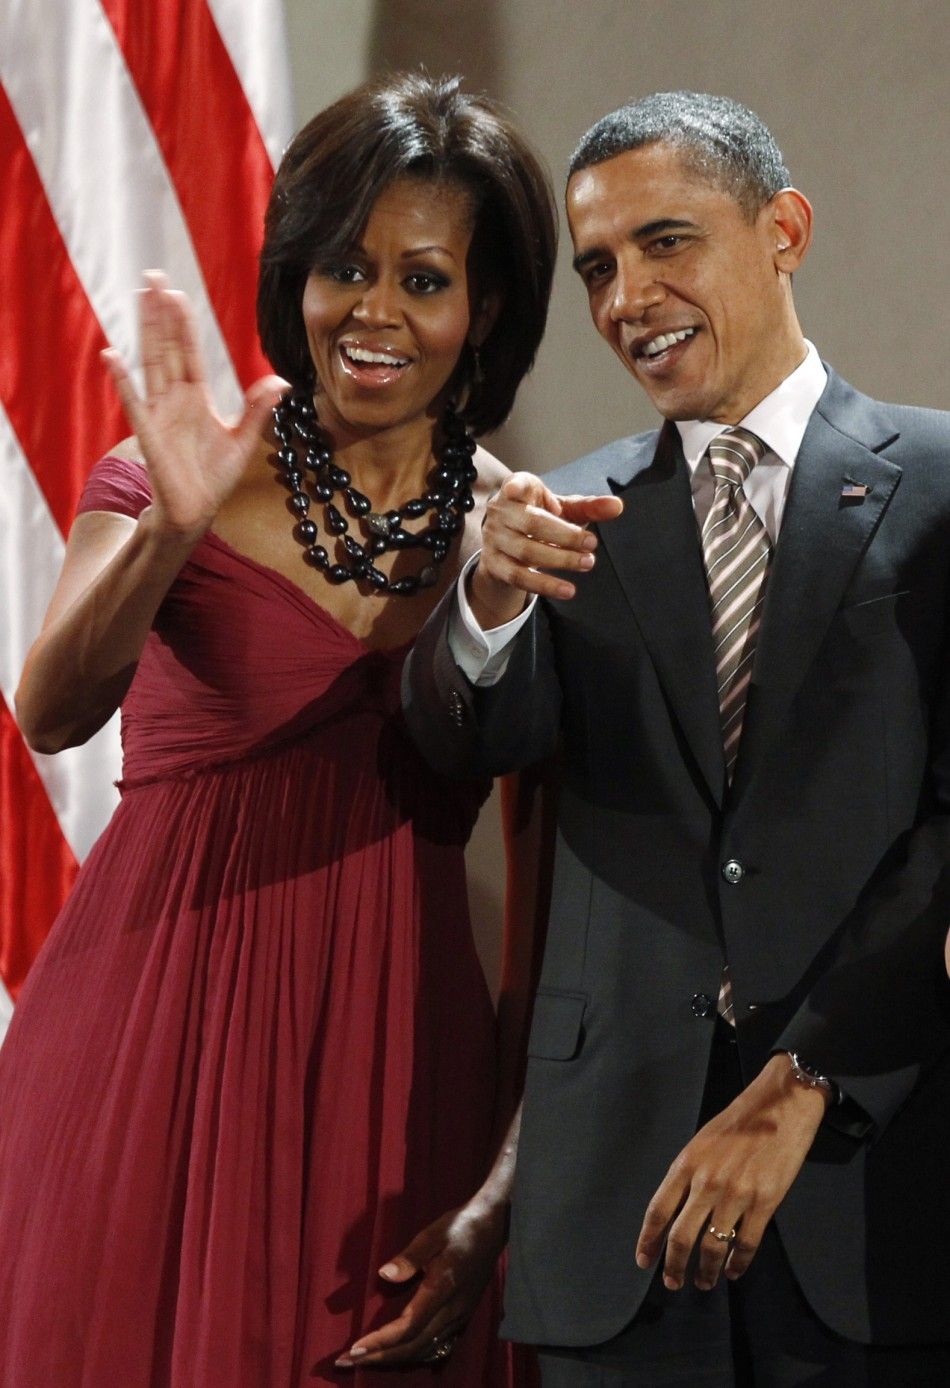 9. Michelle Obamas Top 10 Looks For the Year 2011